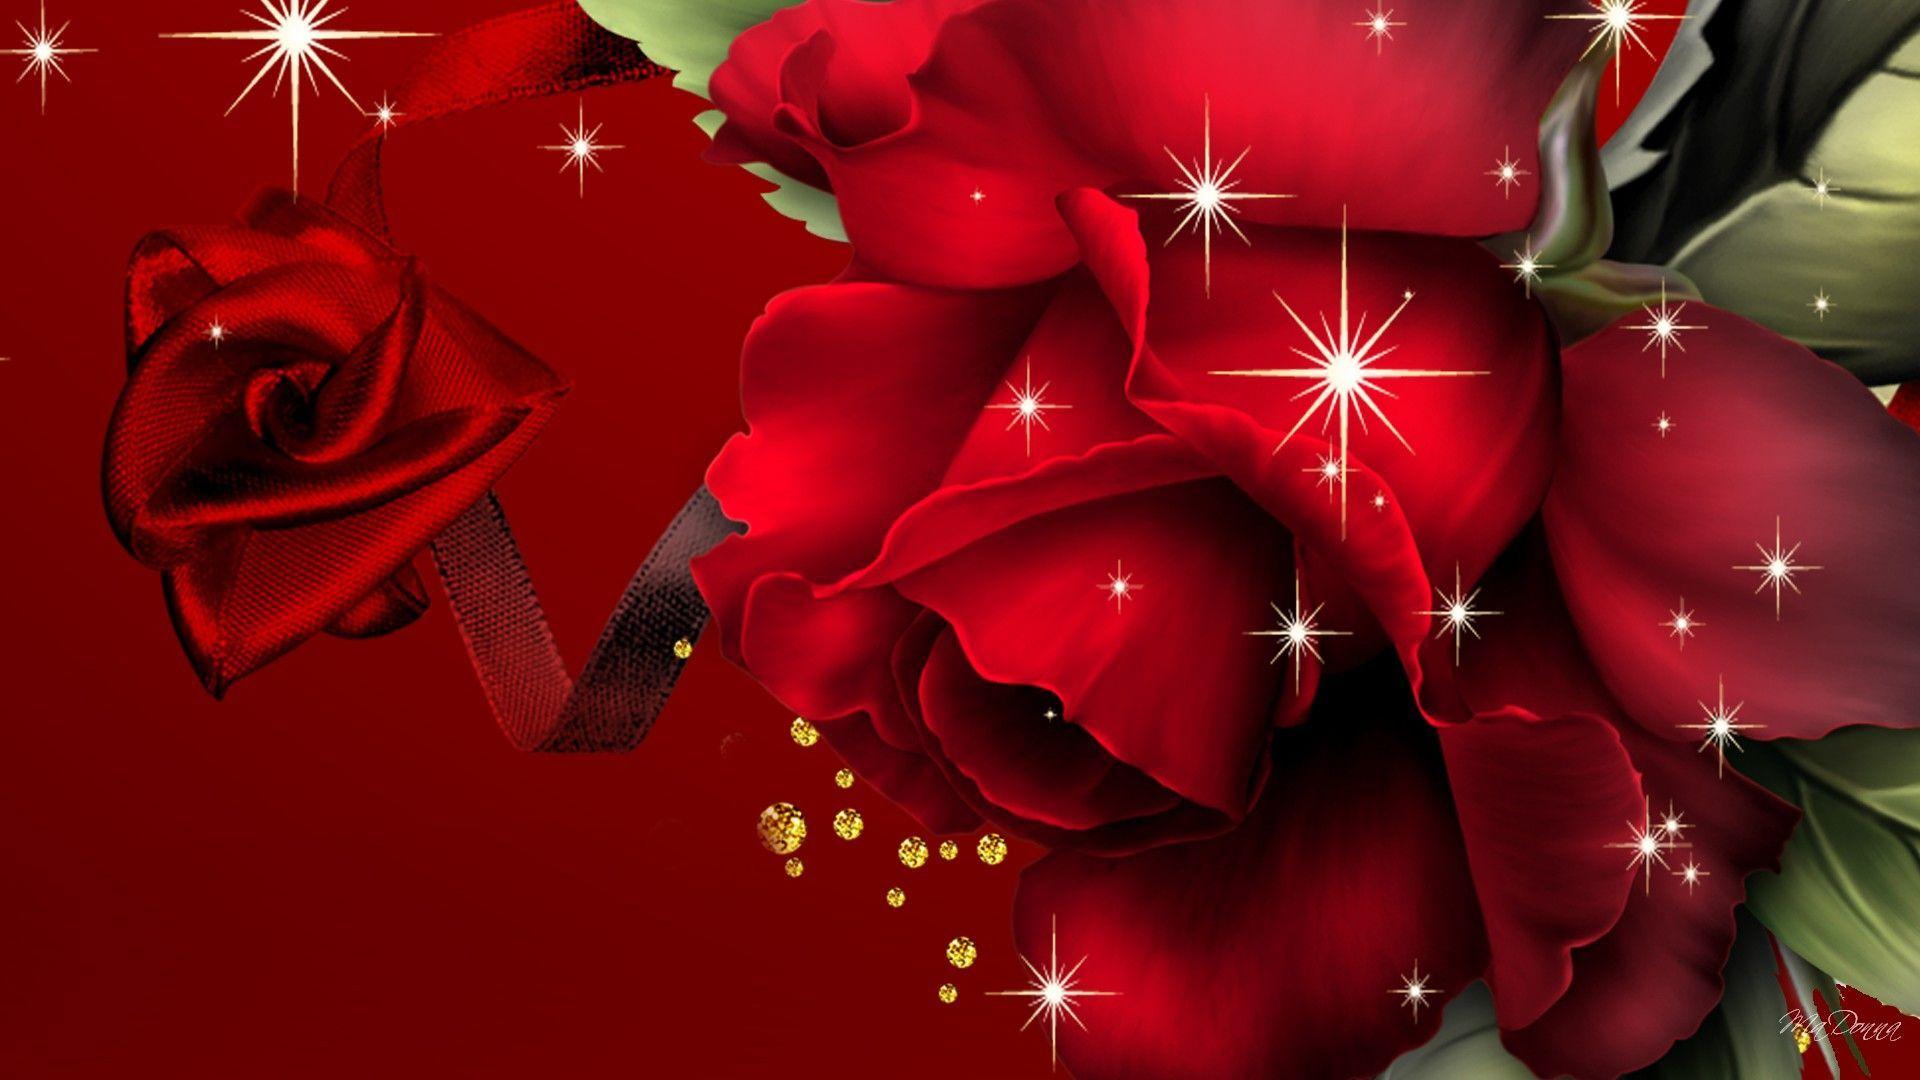 Red Roses Wallpaper Background rose background download free. HD